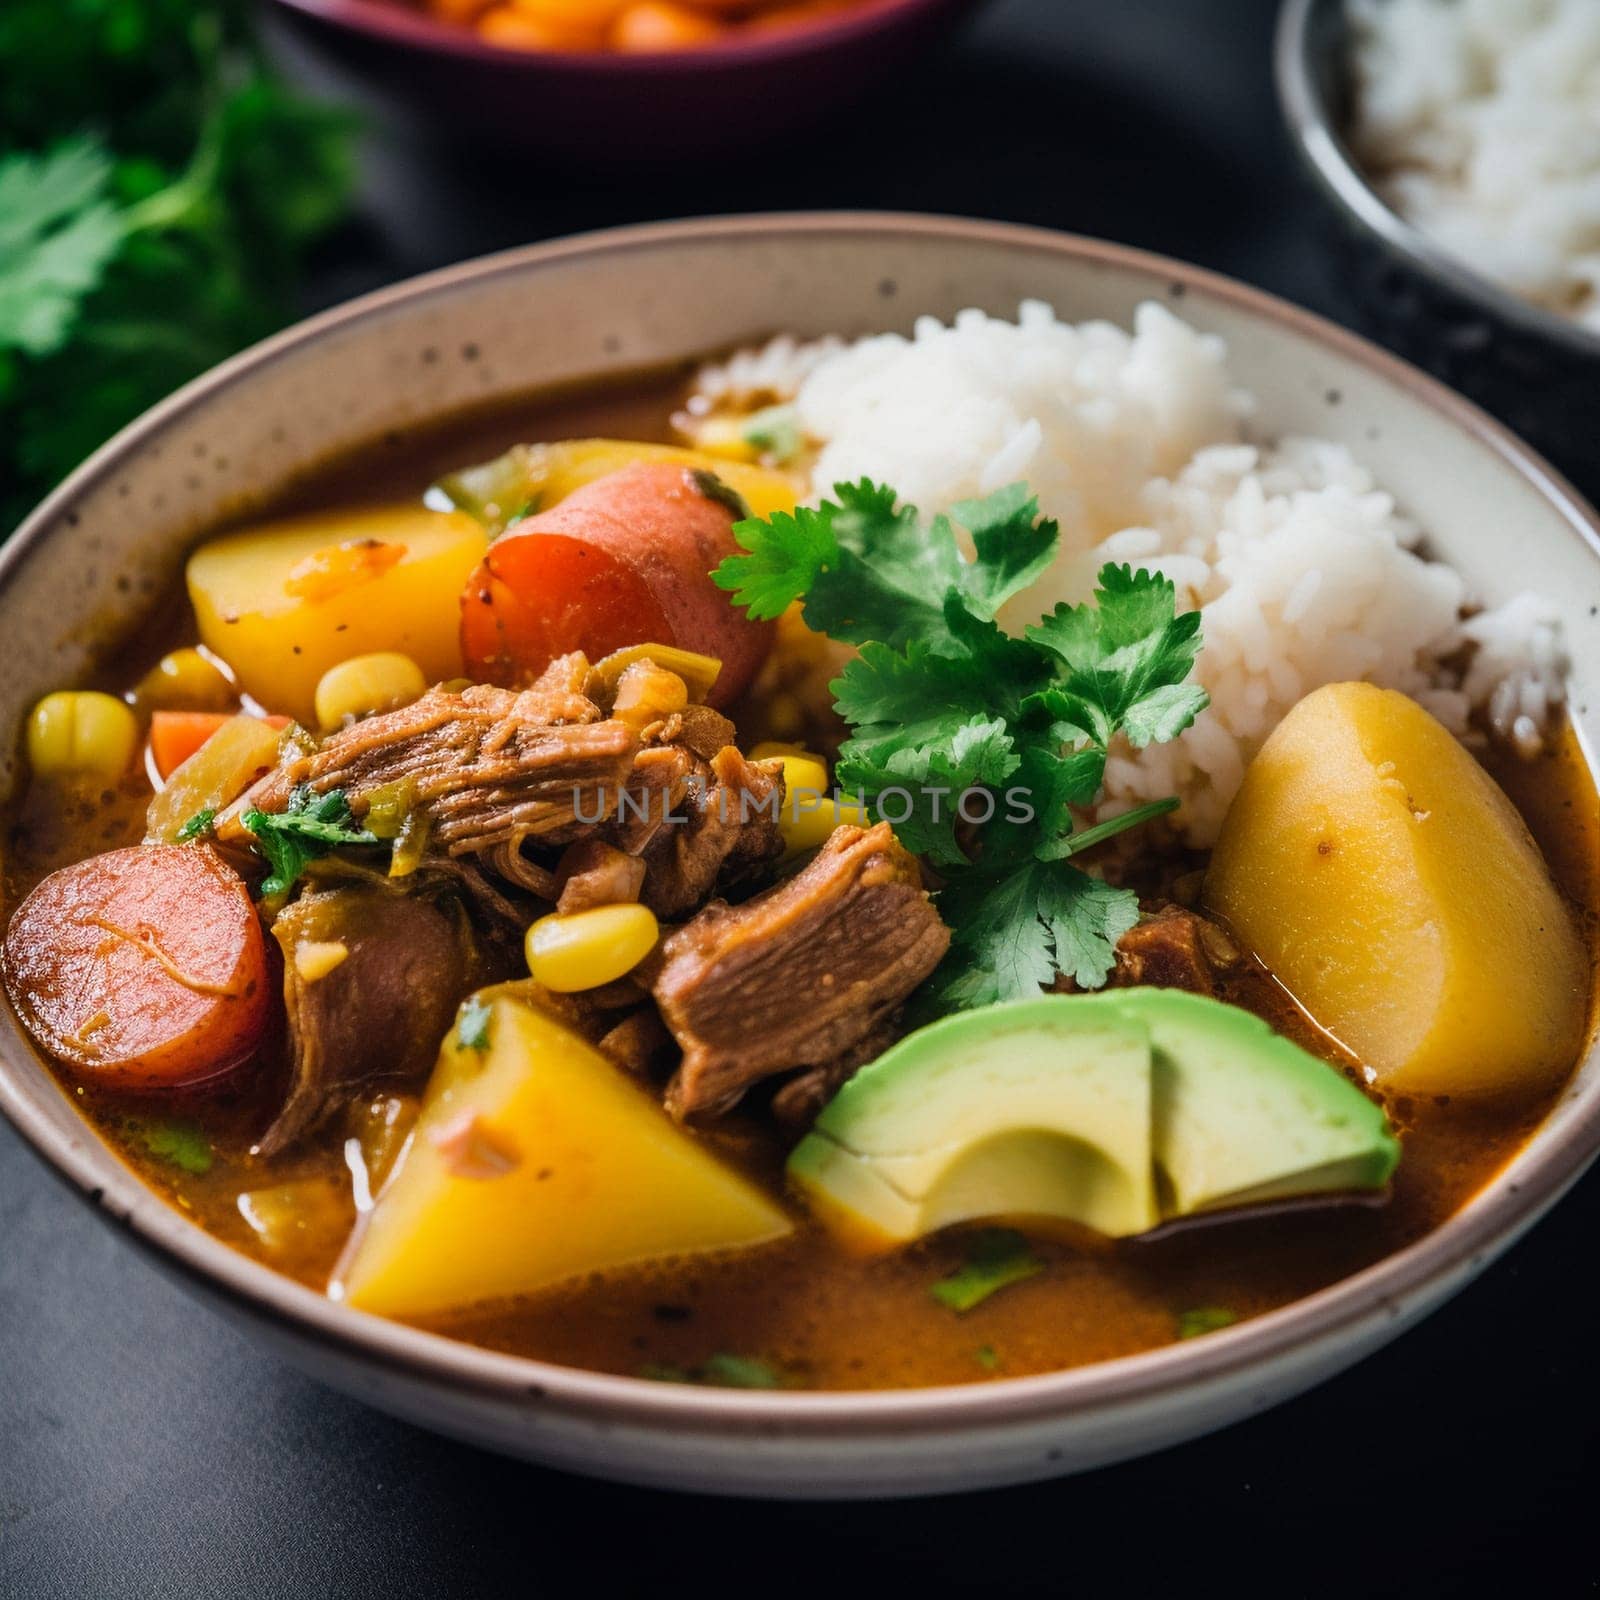 Panamanian Sancocho: Comforting and Flavorful Meat and Vegetable Stew with Rice or Bread by Sahin